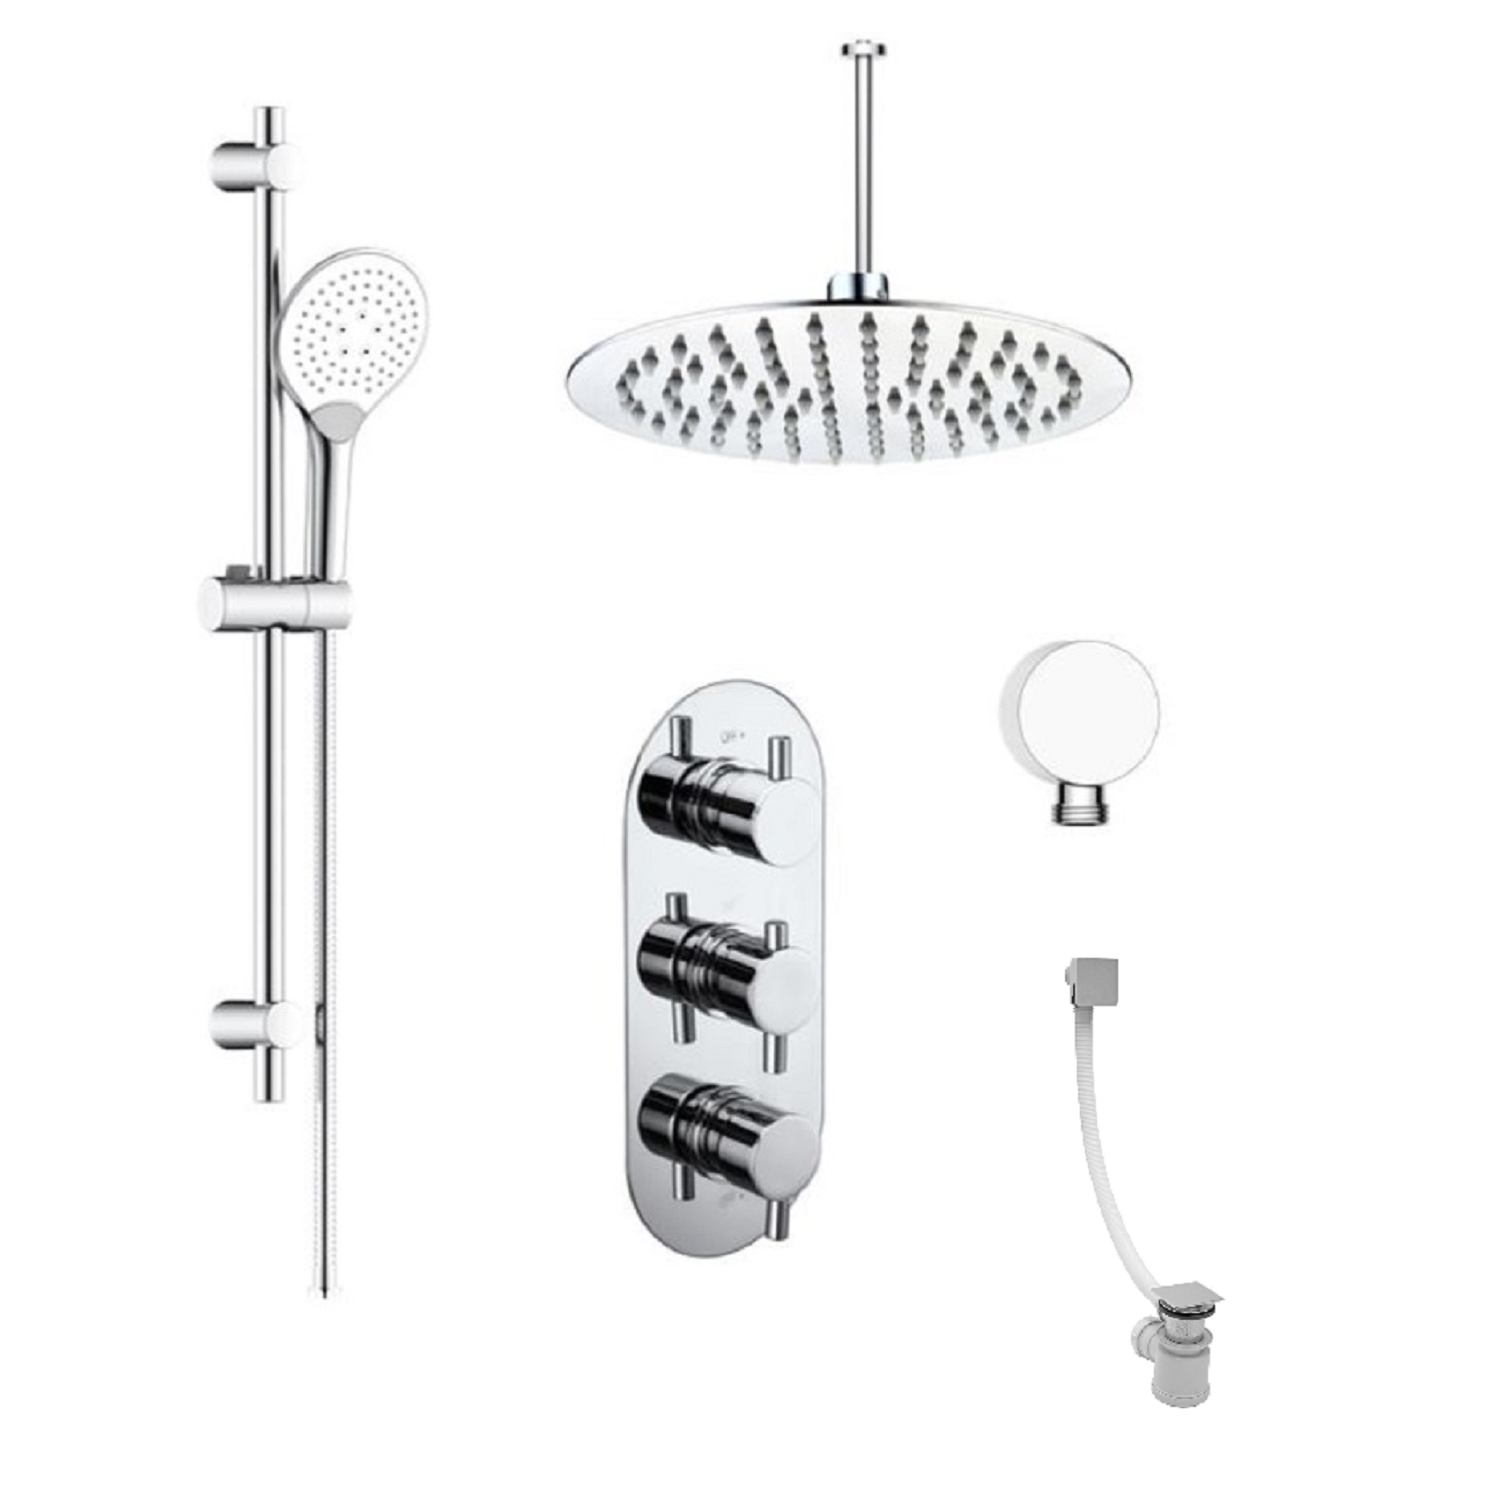 Concealed Thermostatic Mixer Shower with Slim Rainfall Overhead Handset & Bath Filler - Flow